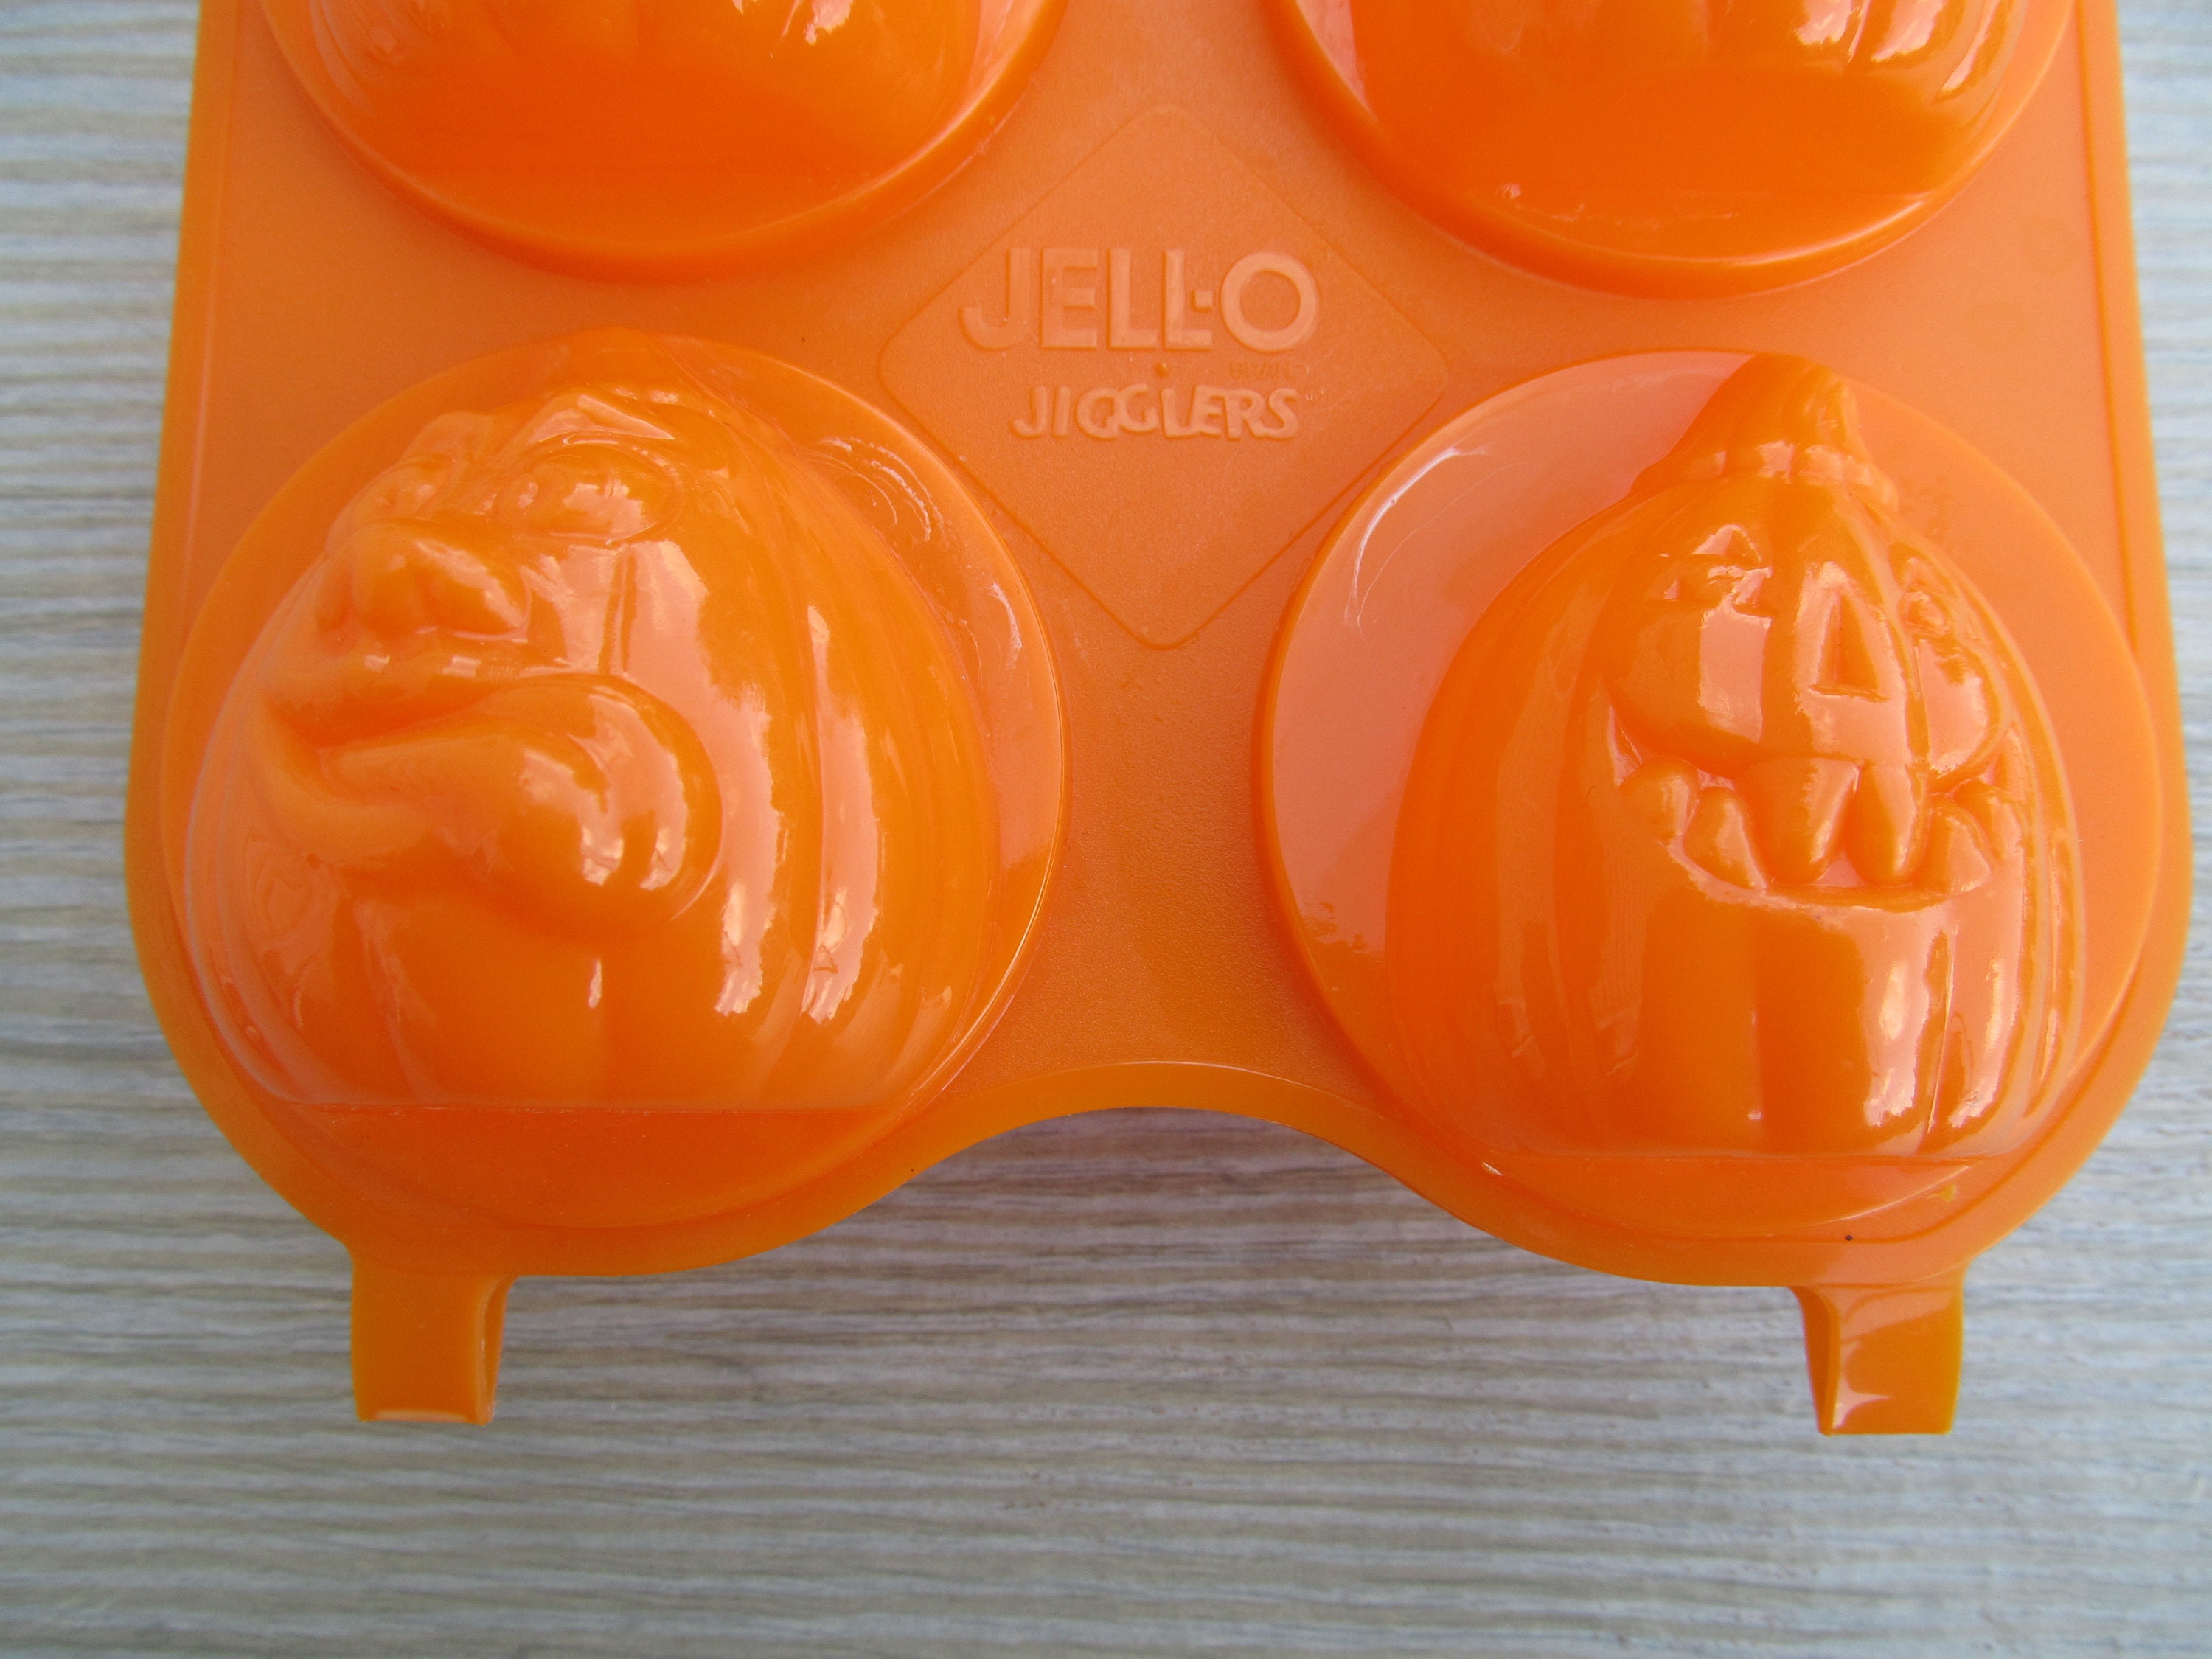 Lot of 10: Assorted JELLO Jiggler molds: Easter, Halloween and general